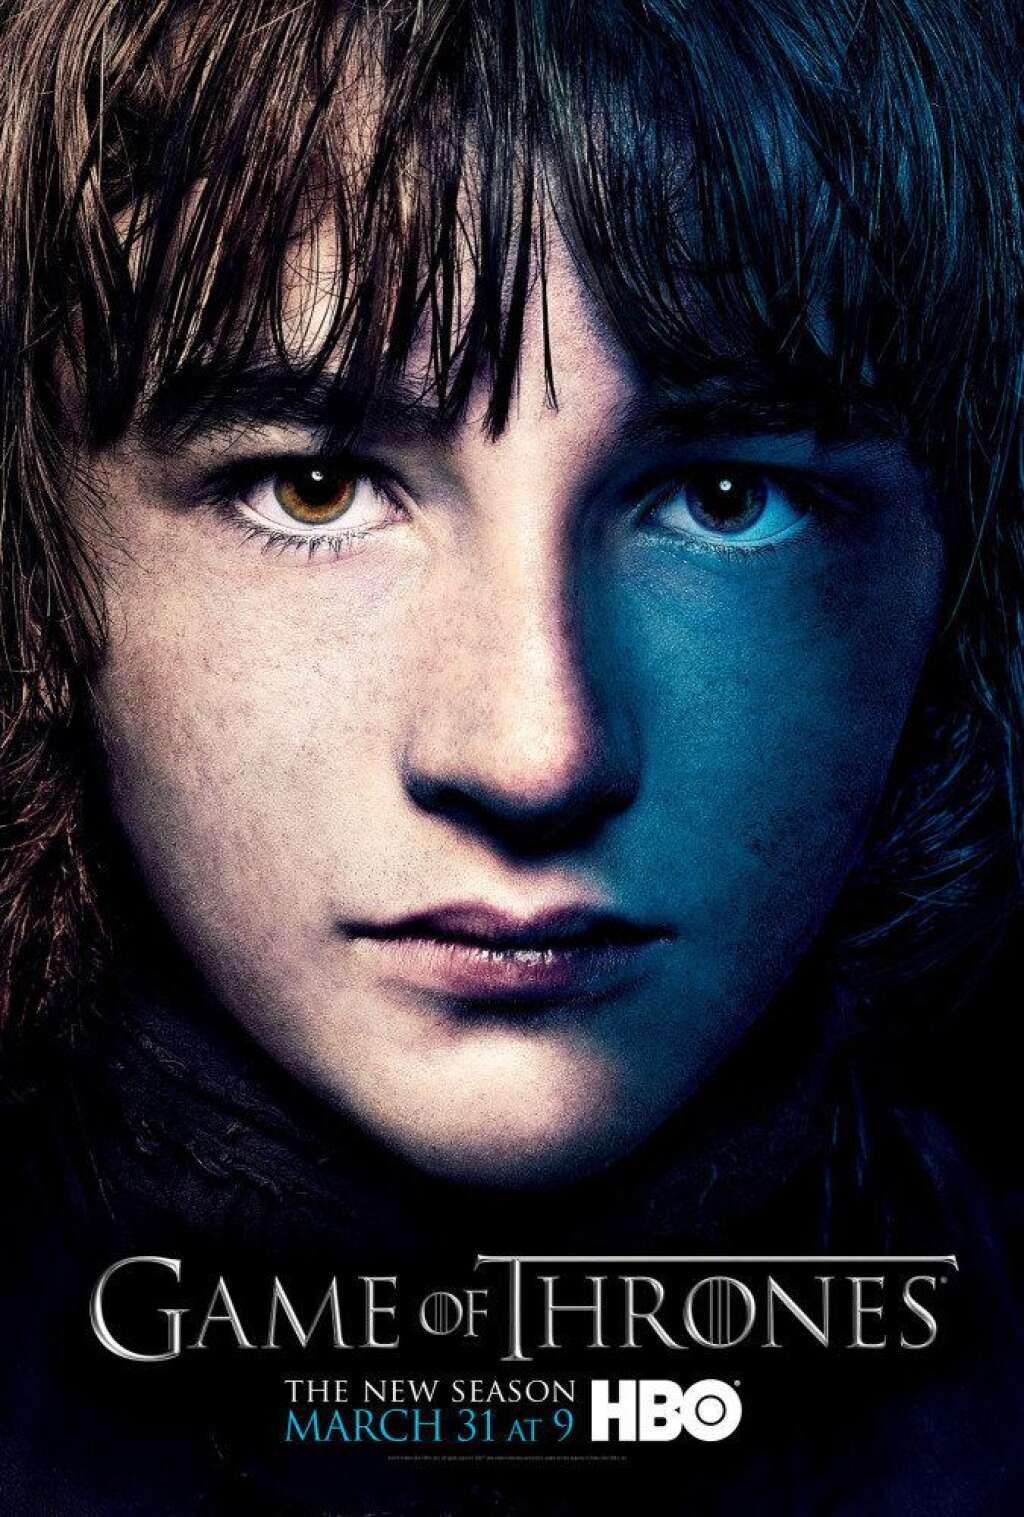 'Game of Thrones' Character Posters - Isaac Hempstead-Wright as Bran Stark.